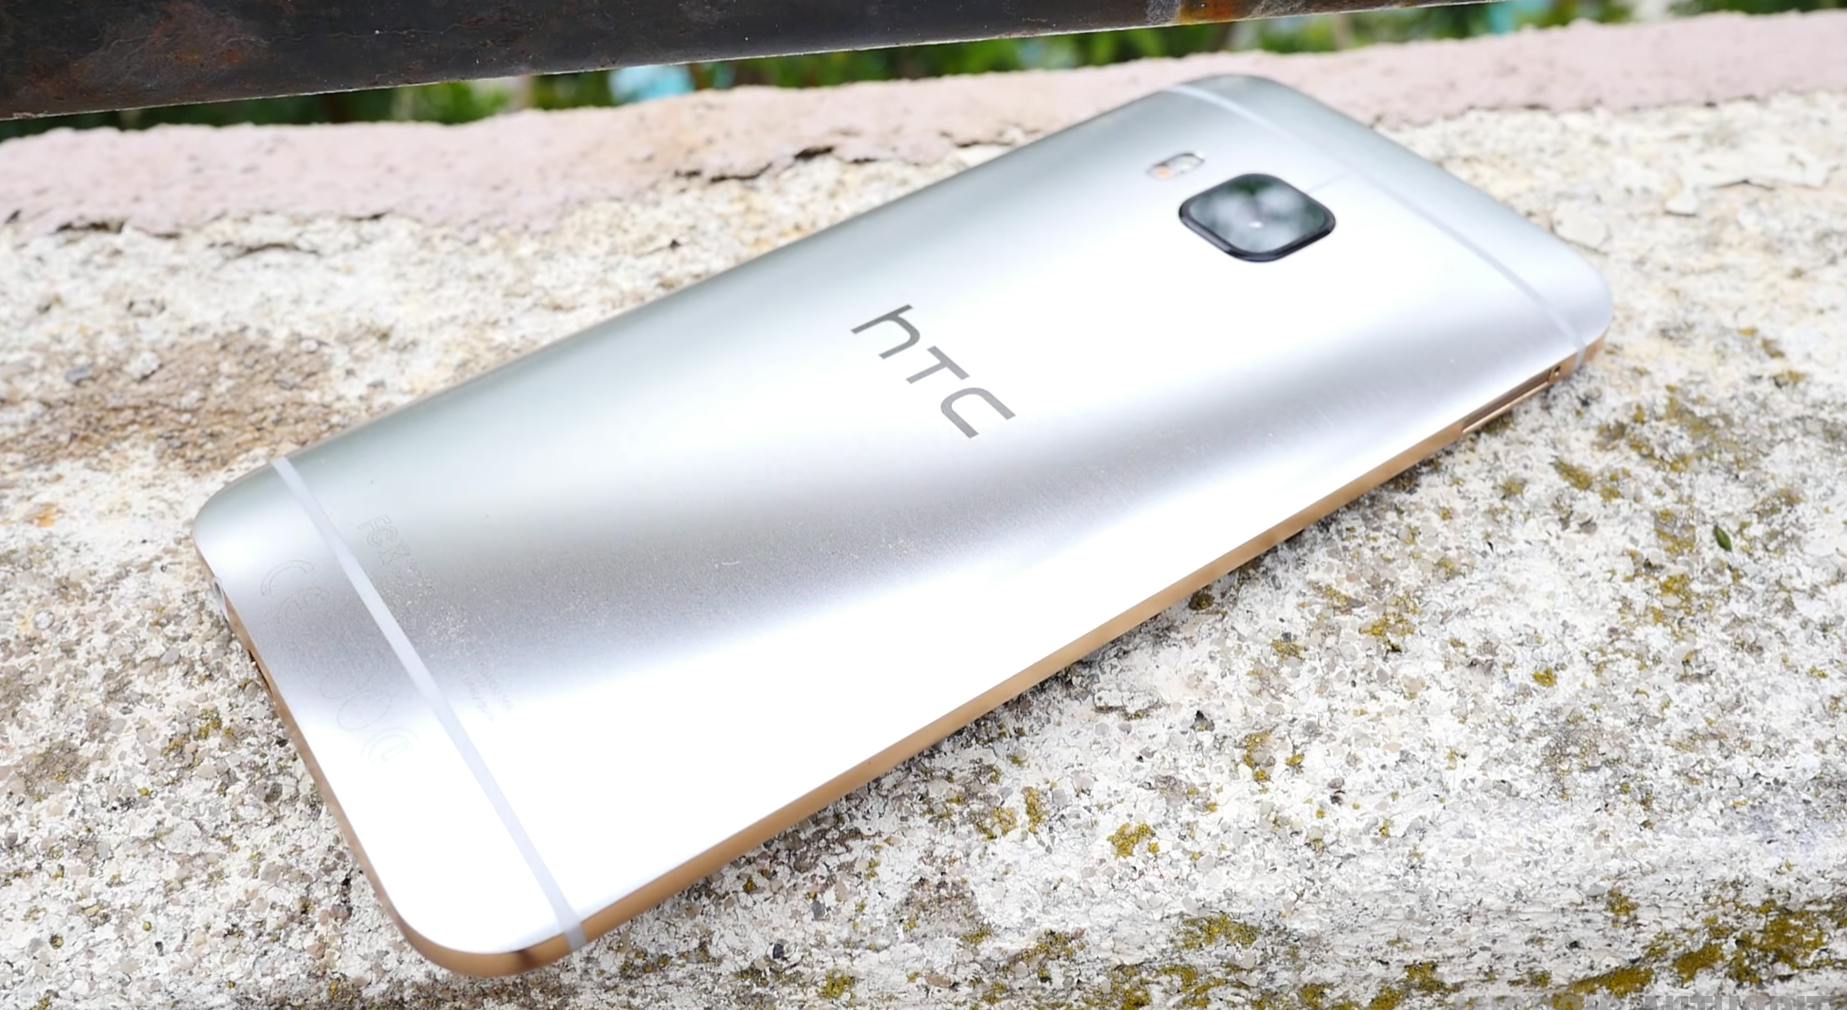 htc one m9 flagship smartphone